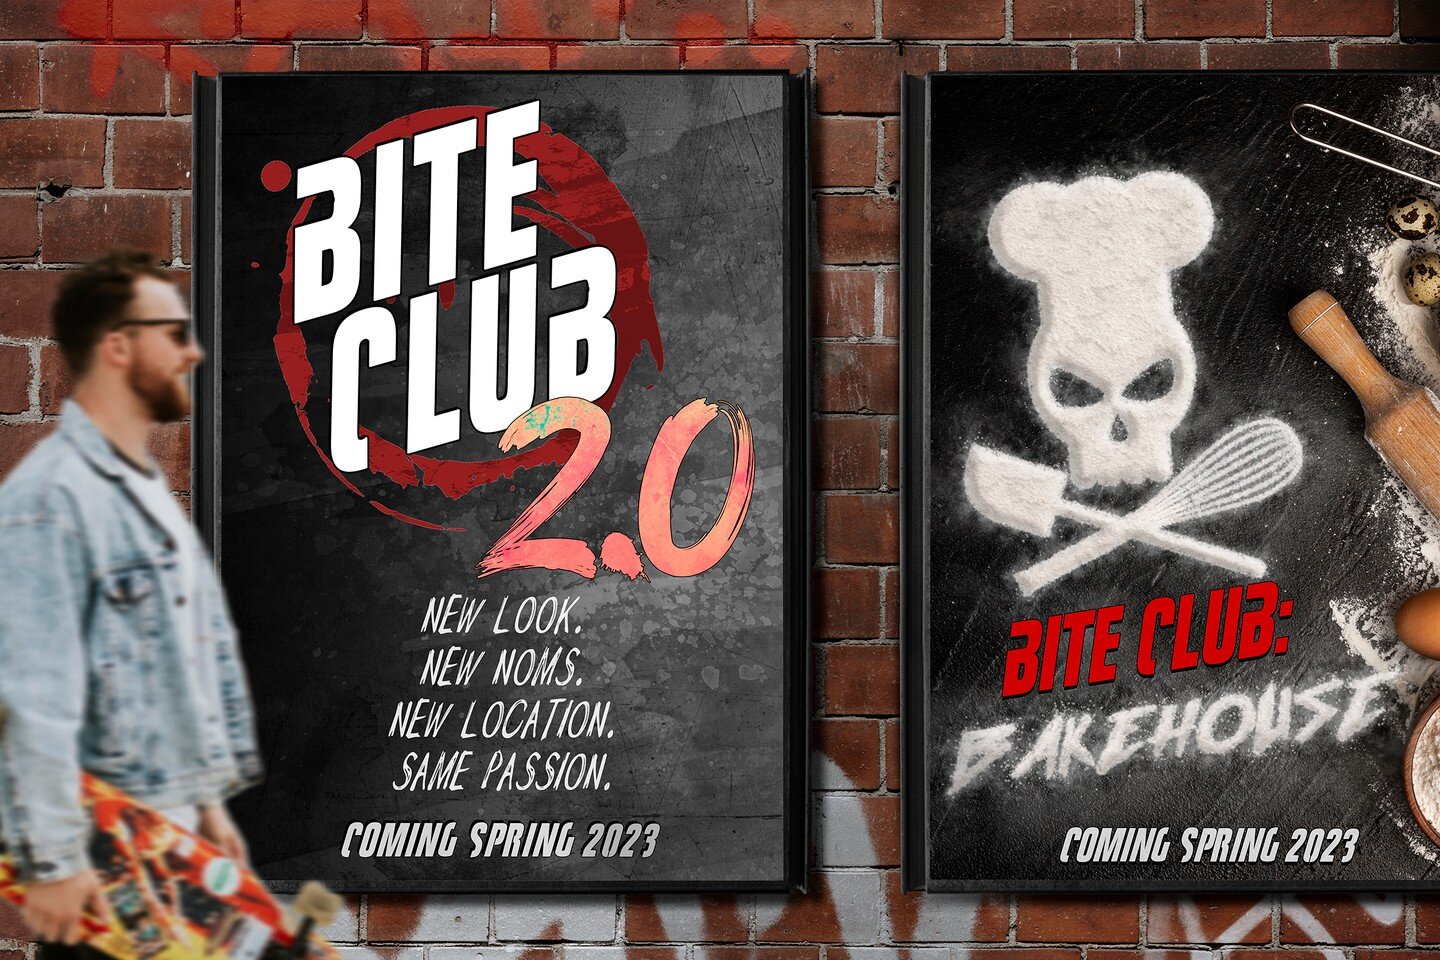 TL:DR (but you should)

So, ready for the Super-Duper Big News for Bite Club???

Over the last few months, we&rsquo;ve been doing some connecting and deals behind the scenes. We&rsquo;ve been planning and designing, tearing down and building up. I&rs